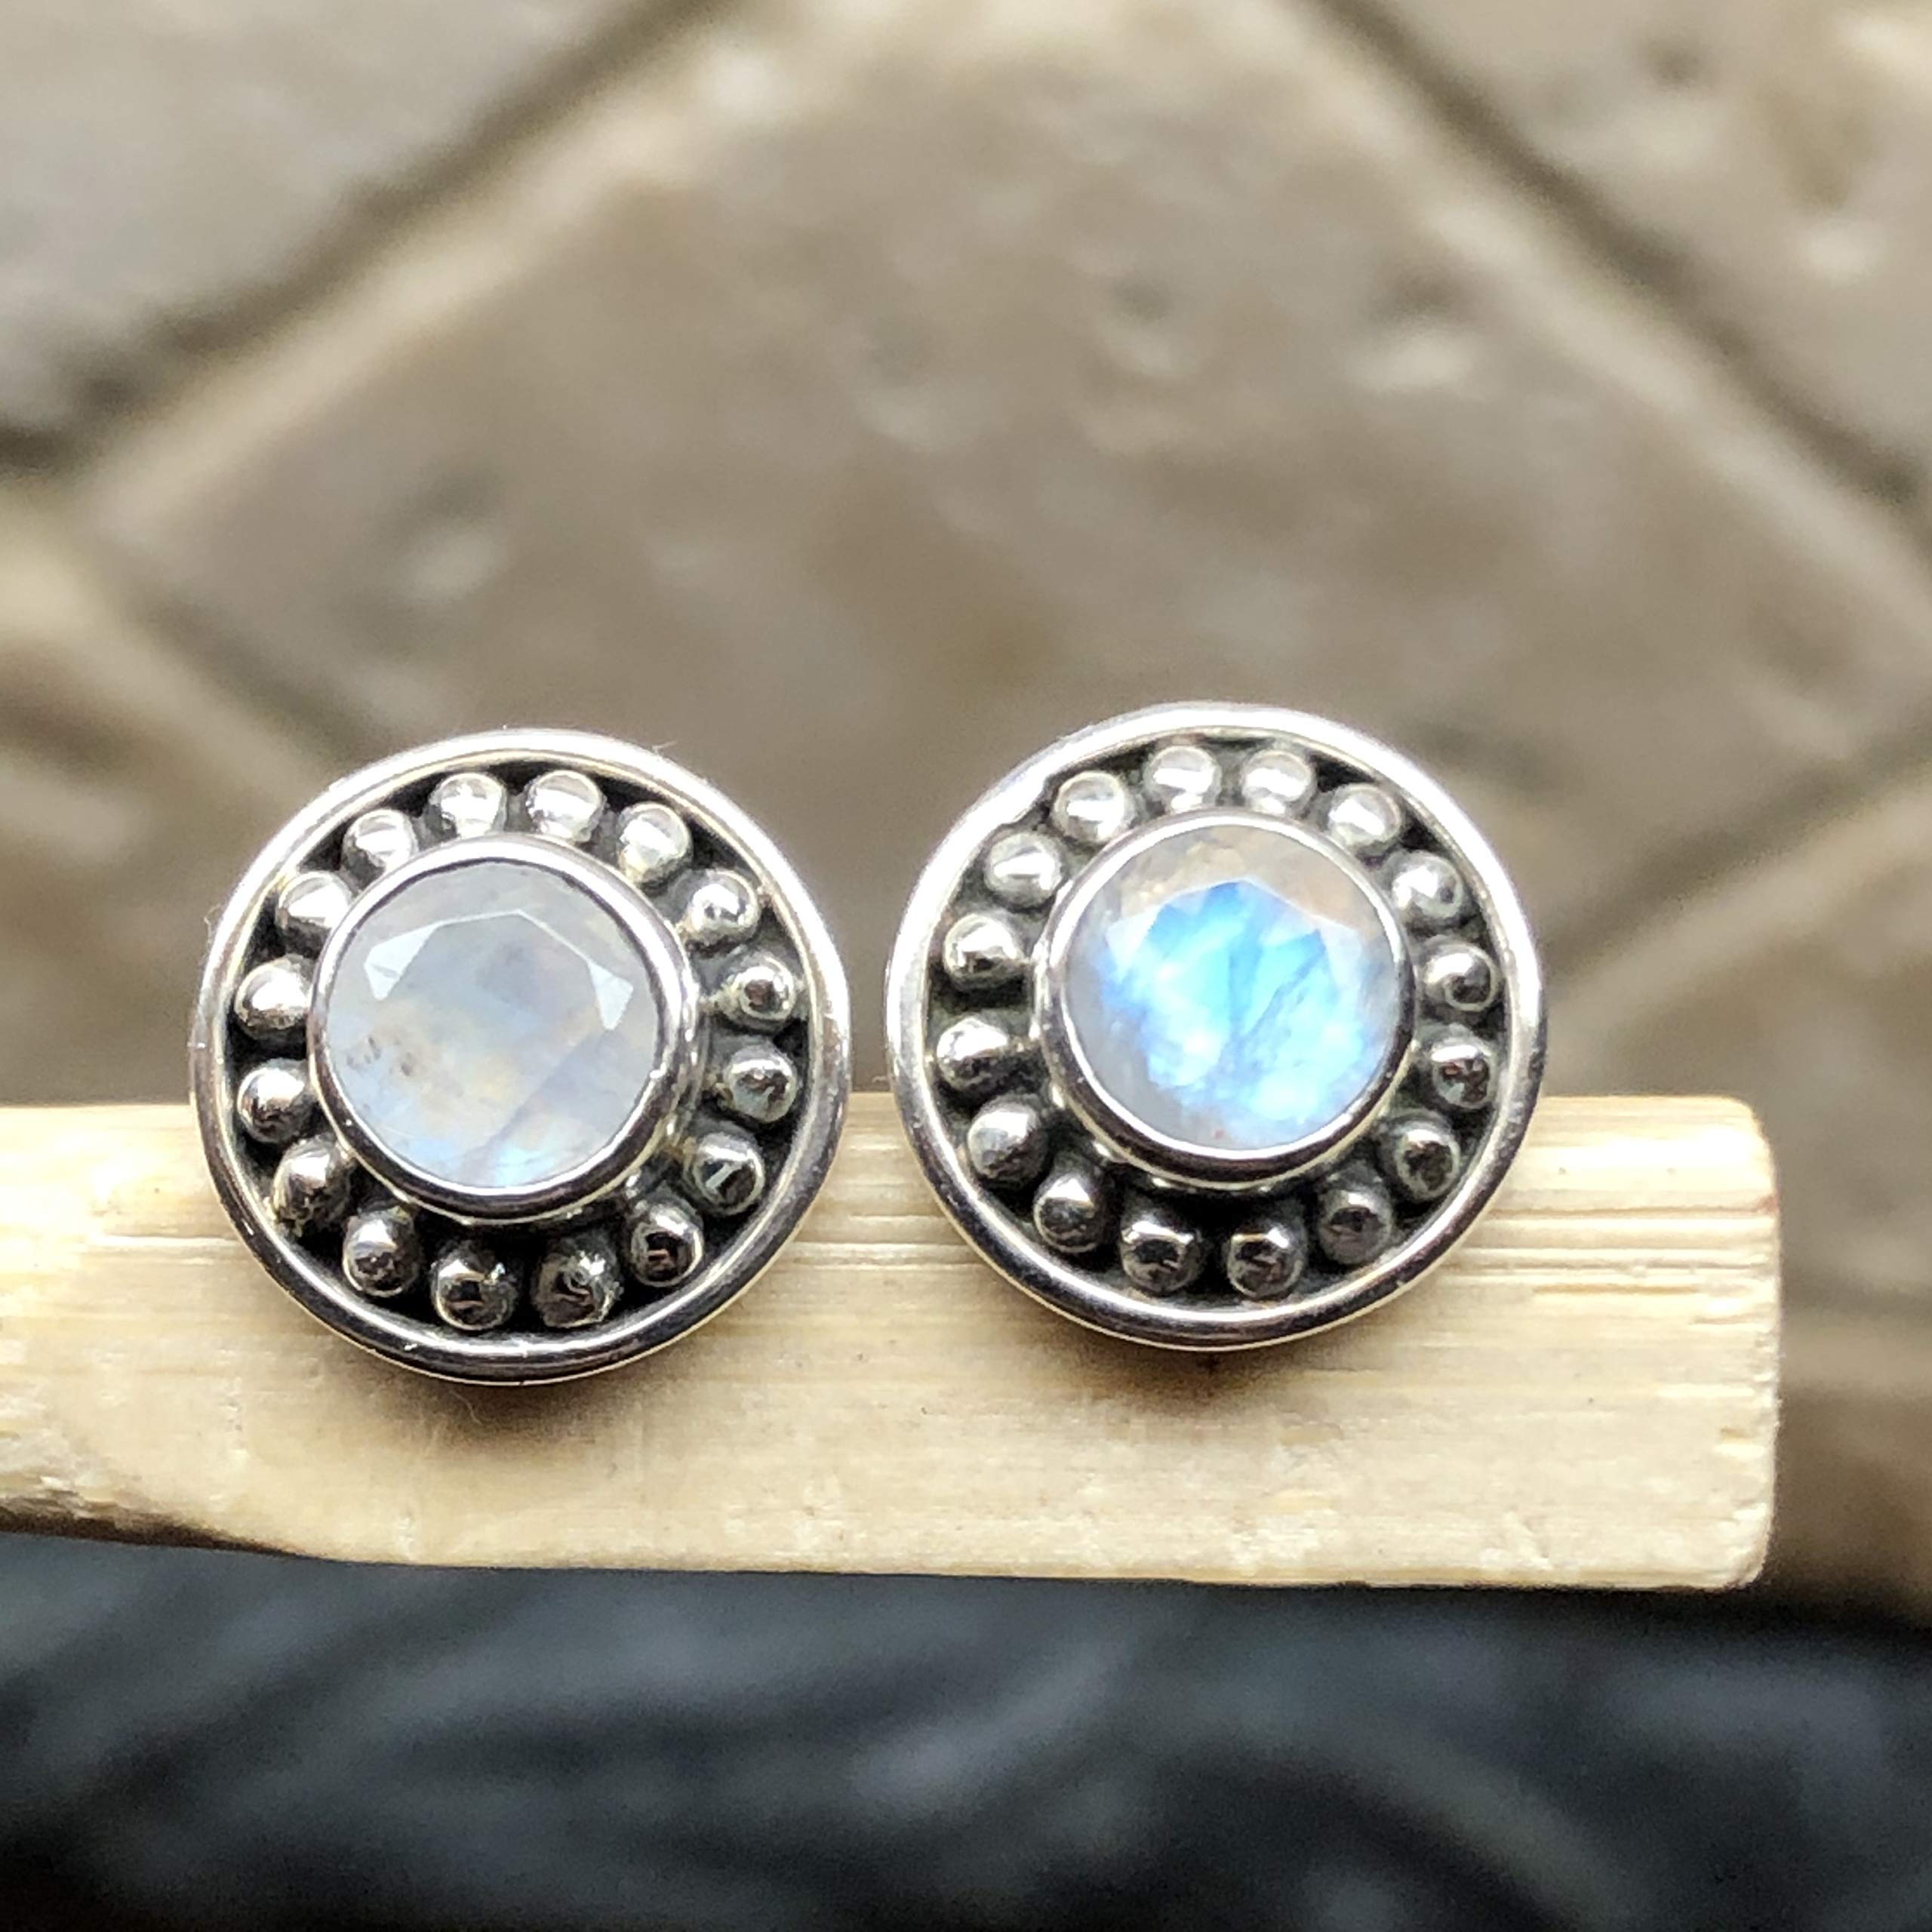 Natural Rainbow Moonstone 925 Solid Sterling Silver Earrings 10mm - Natural Rocks by Kala